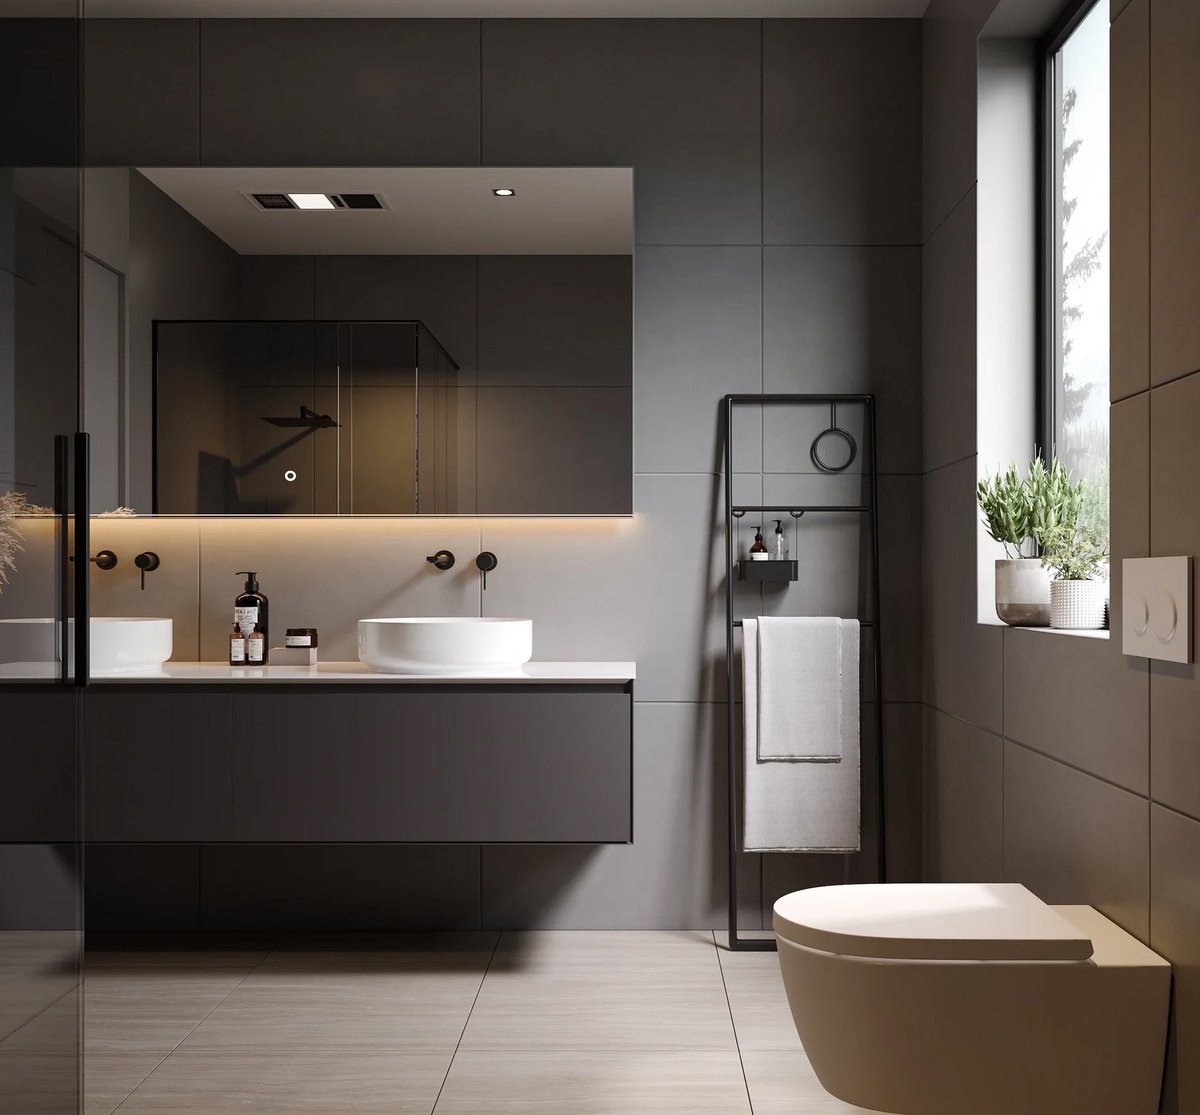 'Elevate your bathroom style to a whole new level with these trendy design ideas!  From minimalist chic to rustic charm, there's a style for every taste. Discover your bathroom's signature look today.  #BathroomStyle #InteriorDesign #HomeInspo'